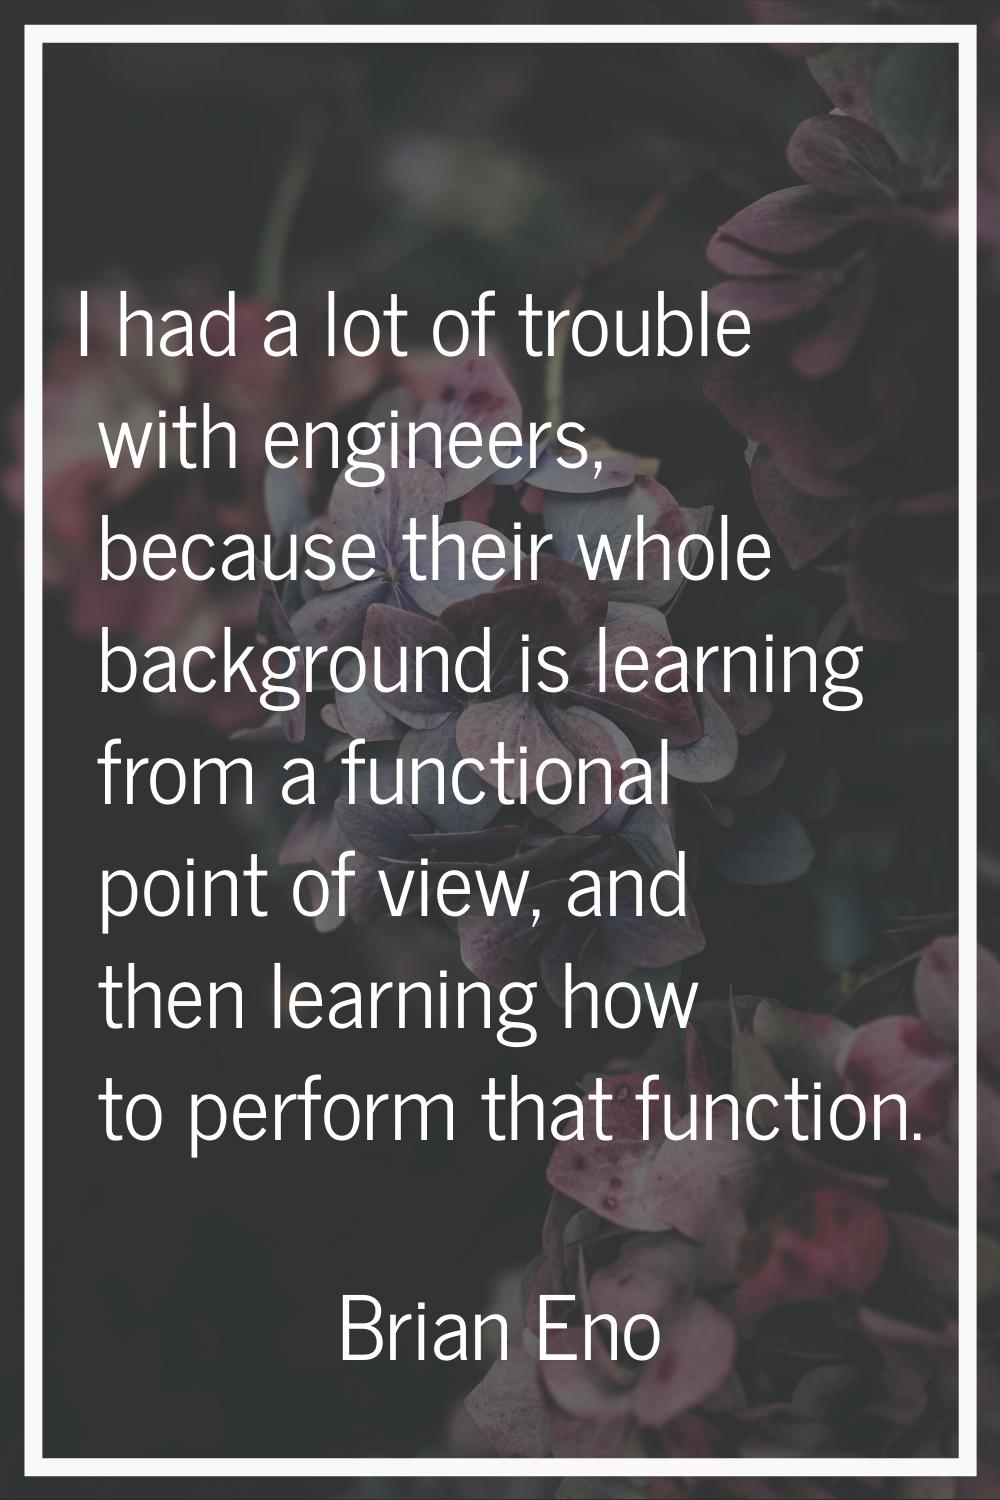 I had a lot of trouble with engineers, because their whole background is learning from a functional